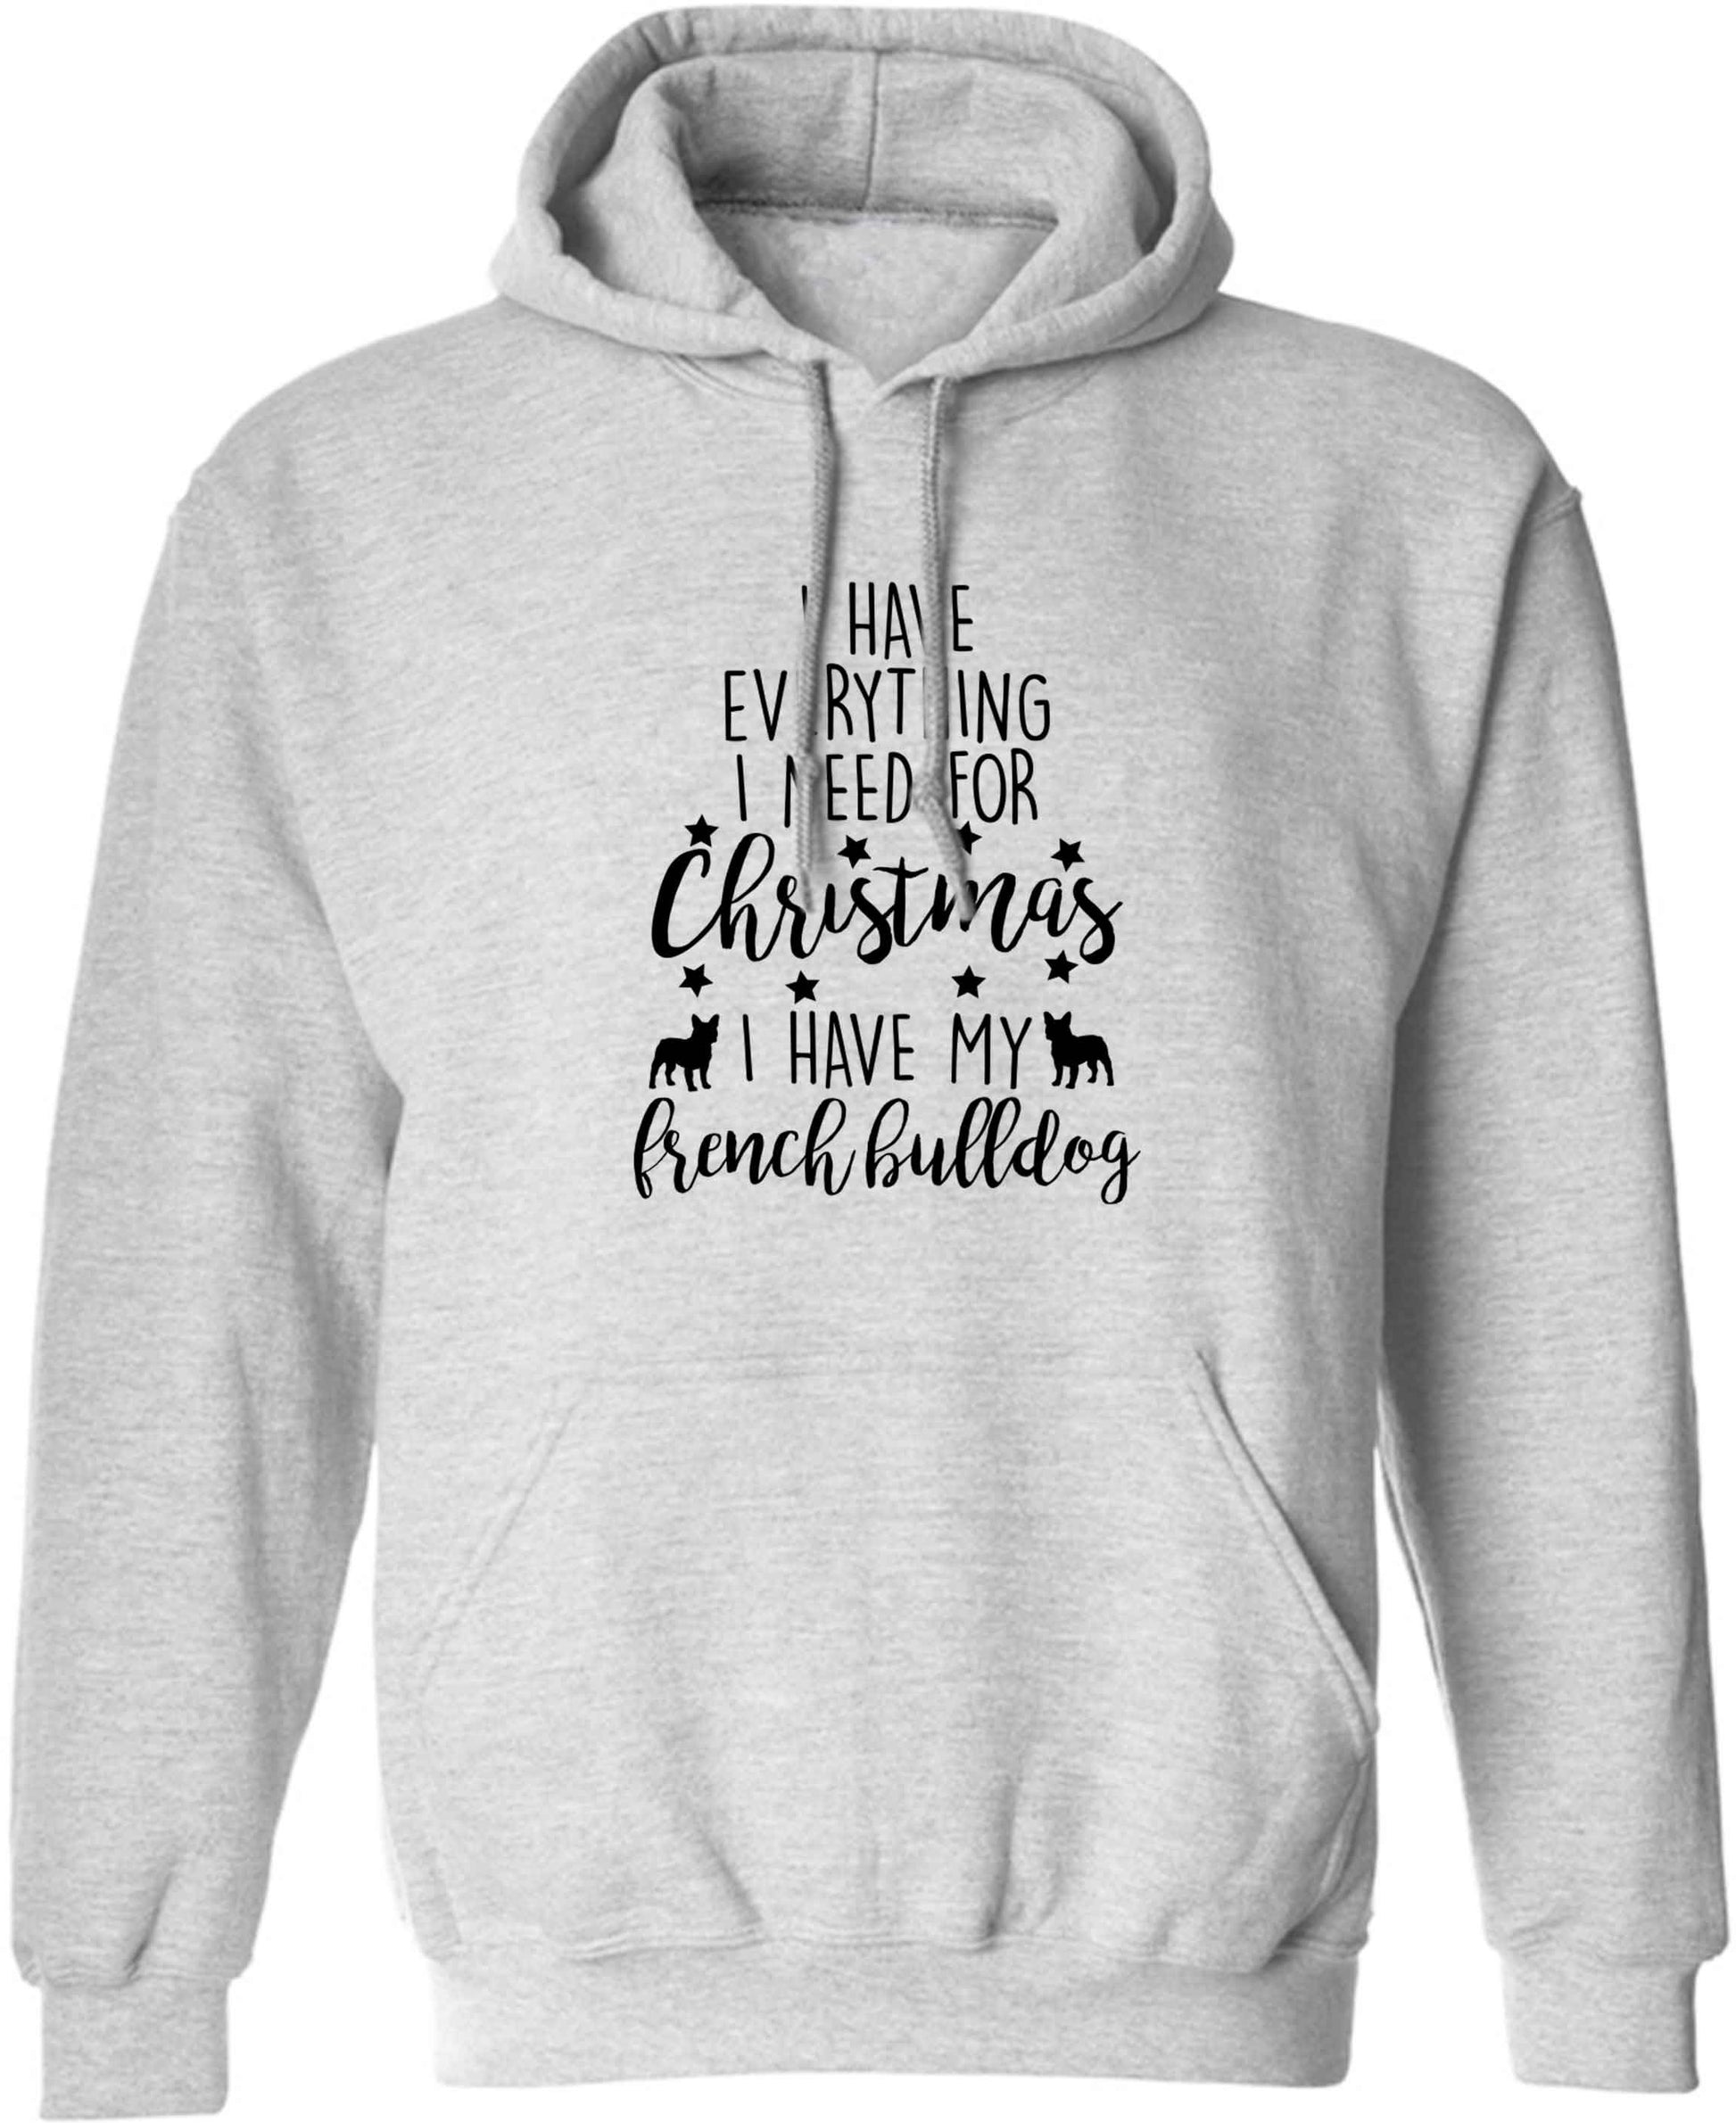 I have everything I need for Christmas I have my french bulldog adults unisex grey hoodie 2XL